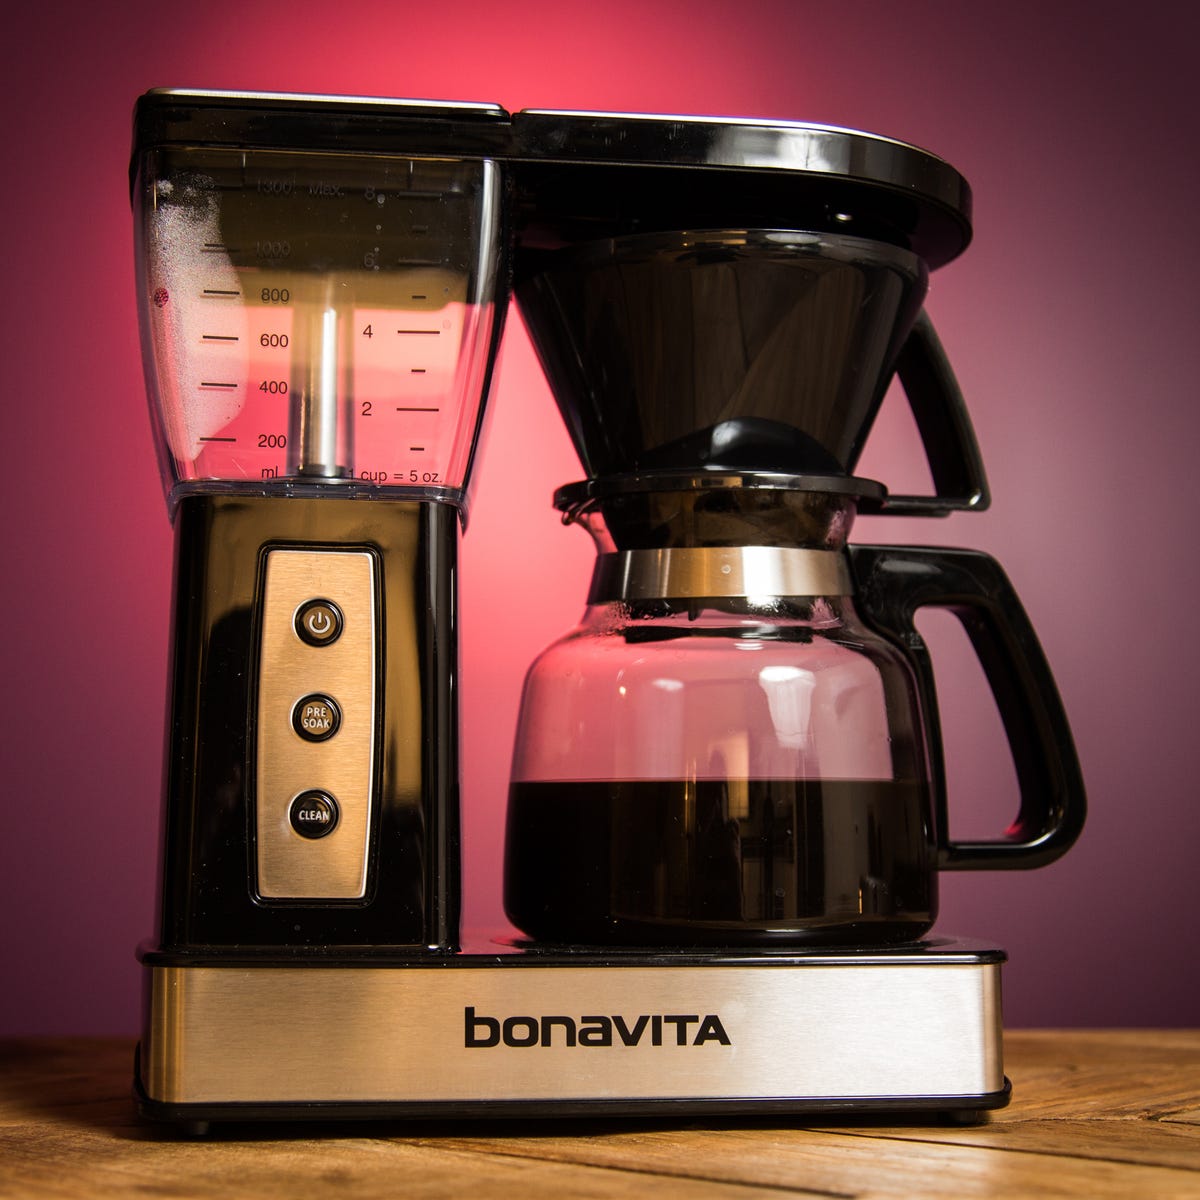 Bonavita BV01002US Coffee Maker review: This cheap-looking coffee maker  brews better than you might expect - CNET